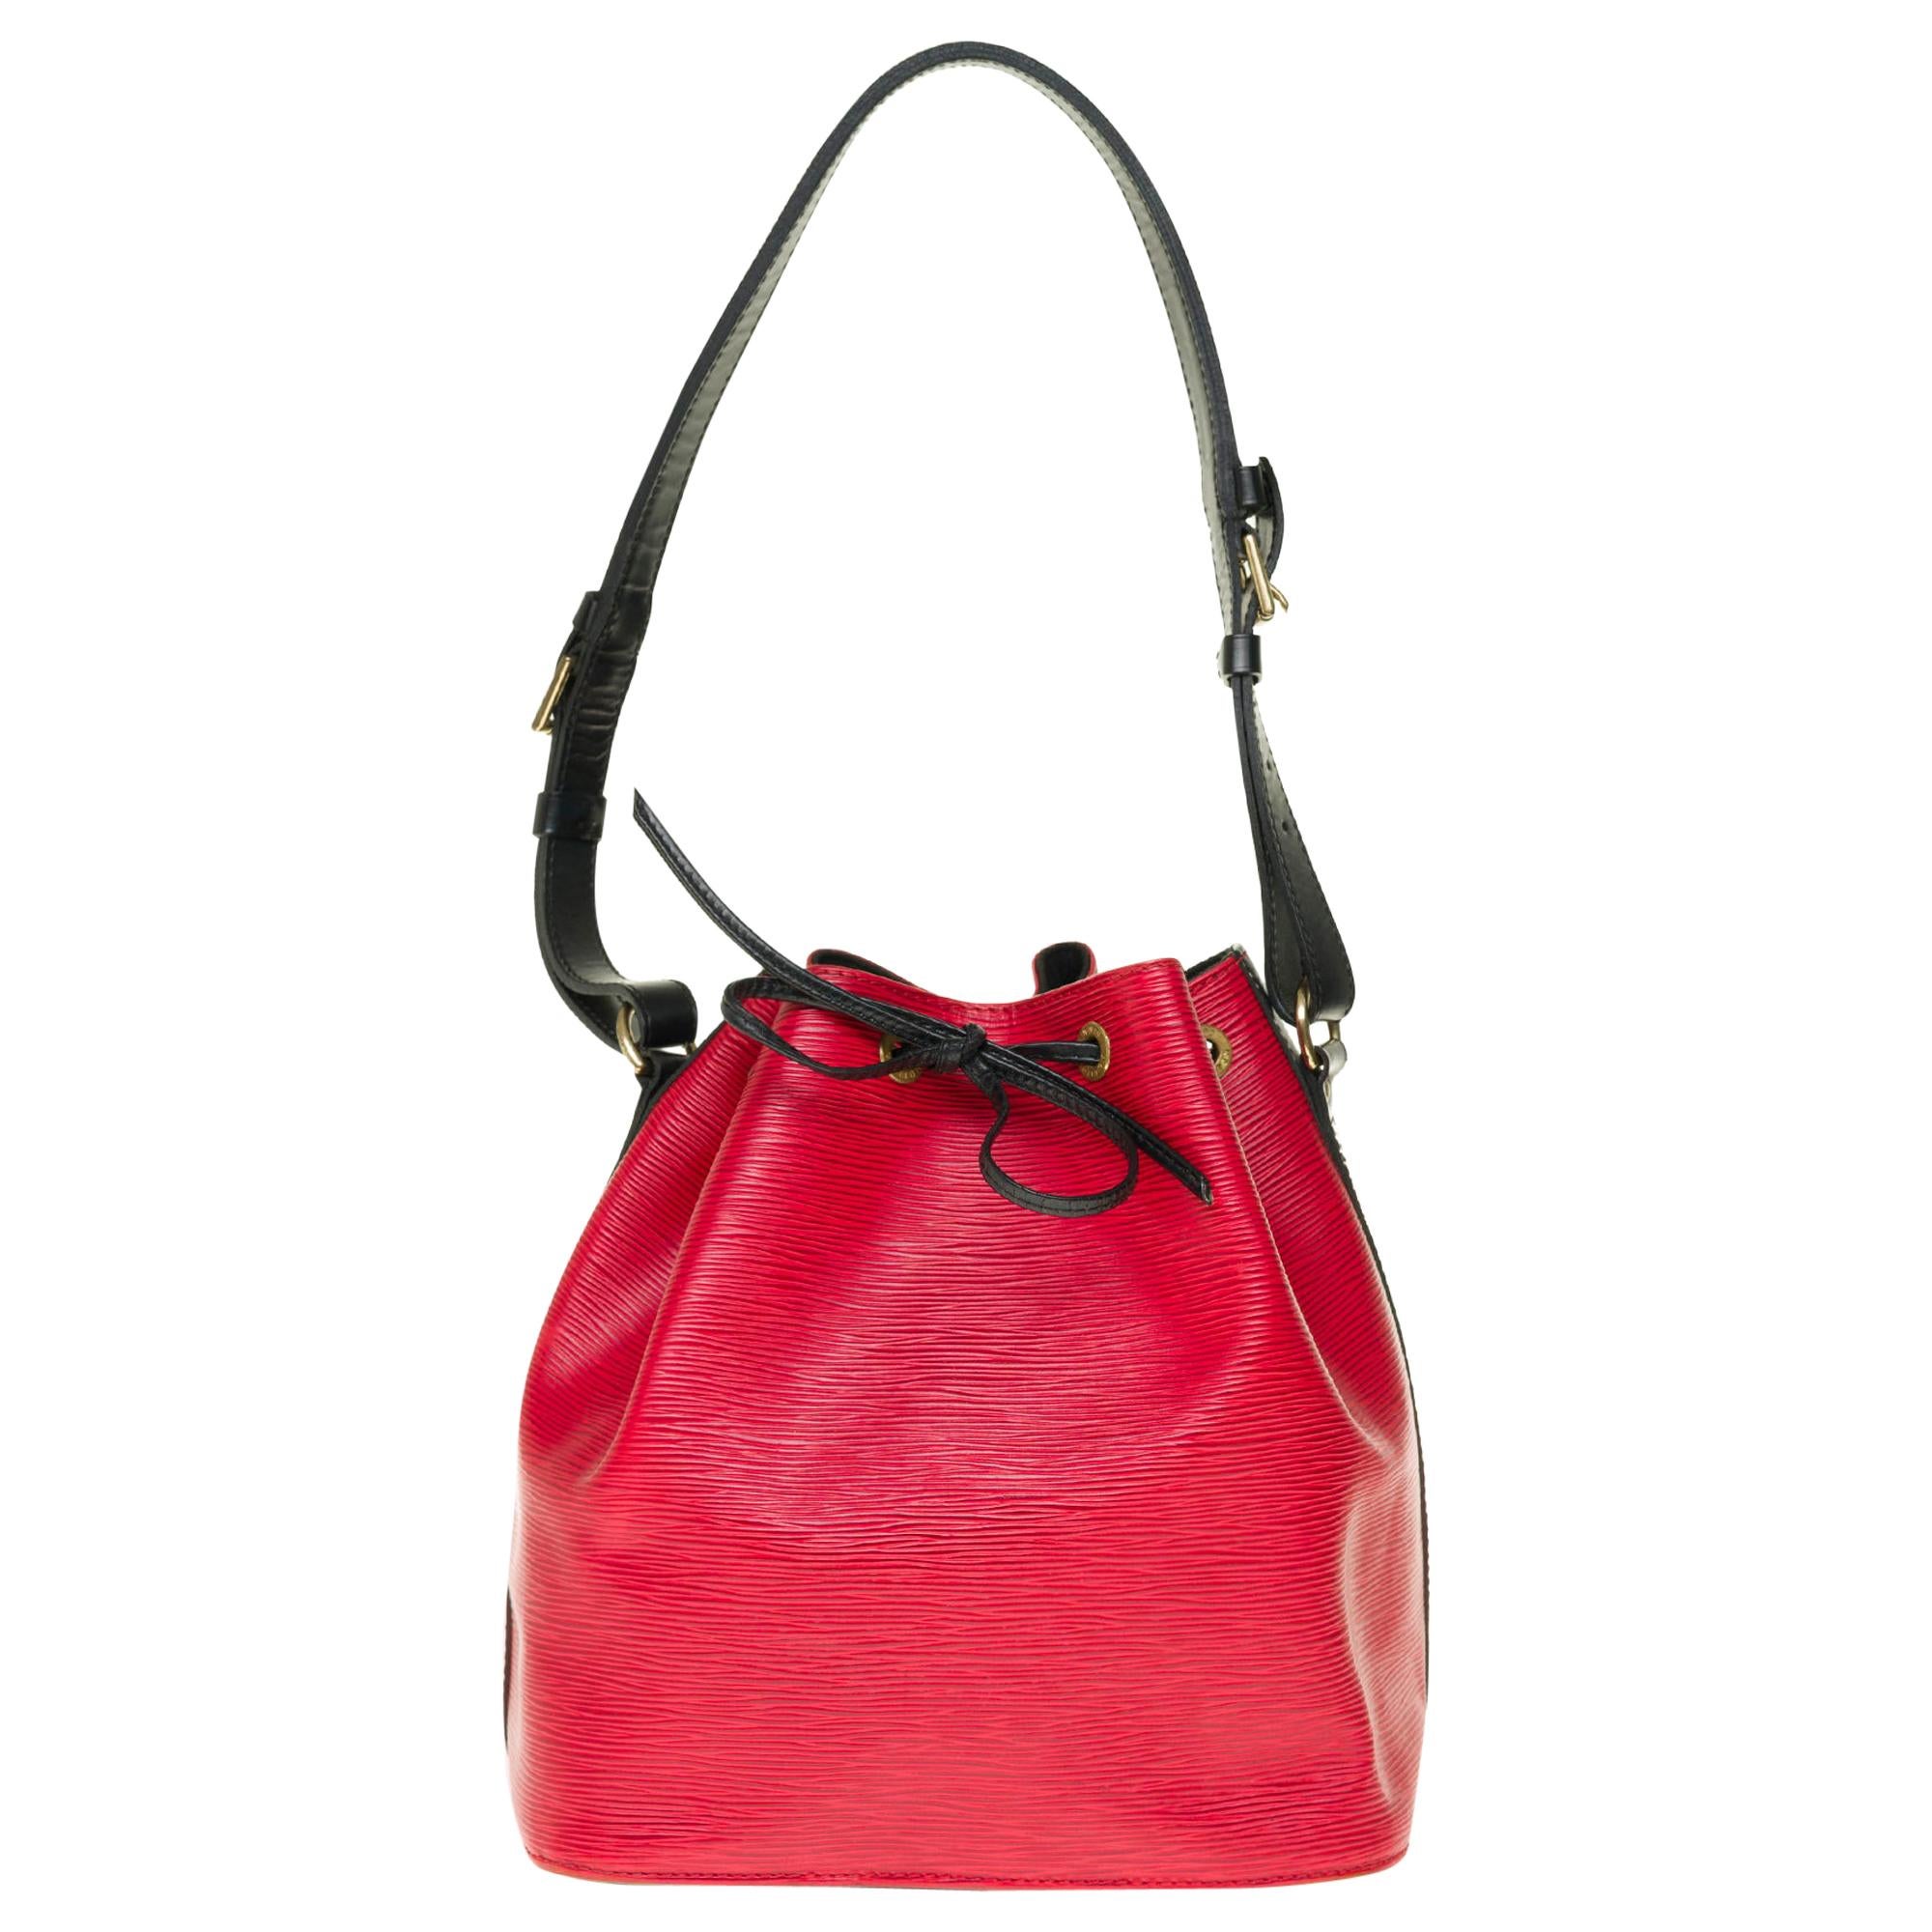 Louis Vuitton Noé PM shoulder bag in red and black epi leather